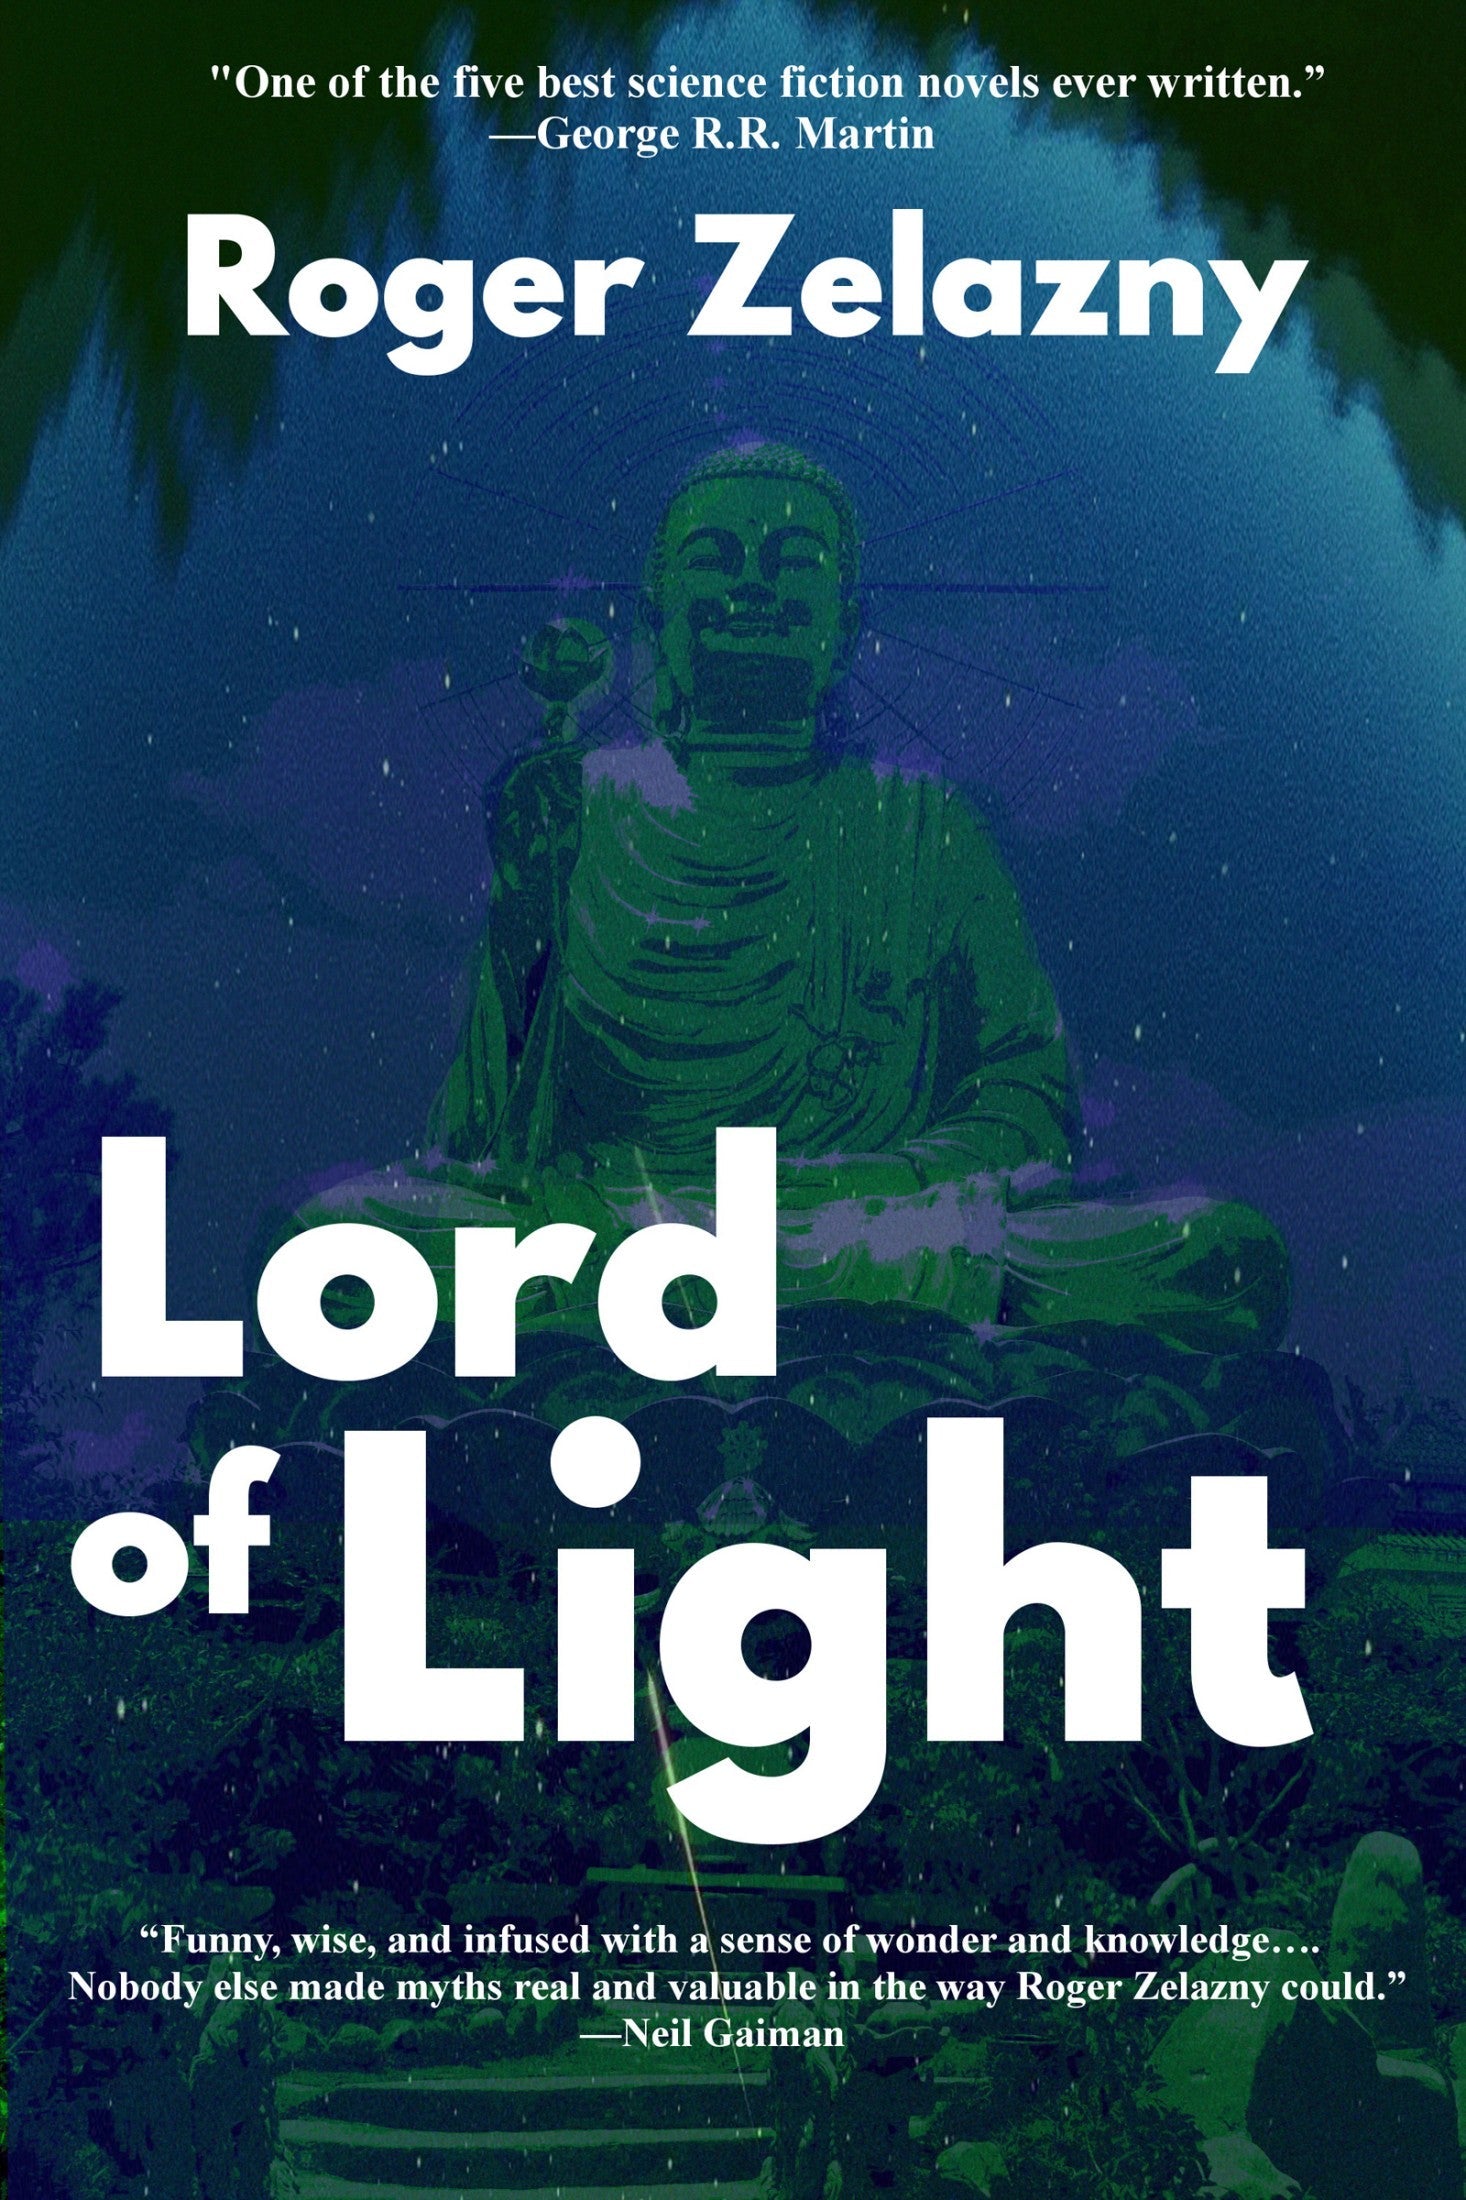 Cover art for Lord of Light.